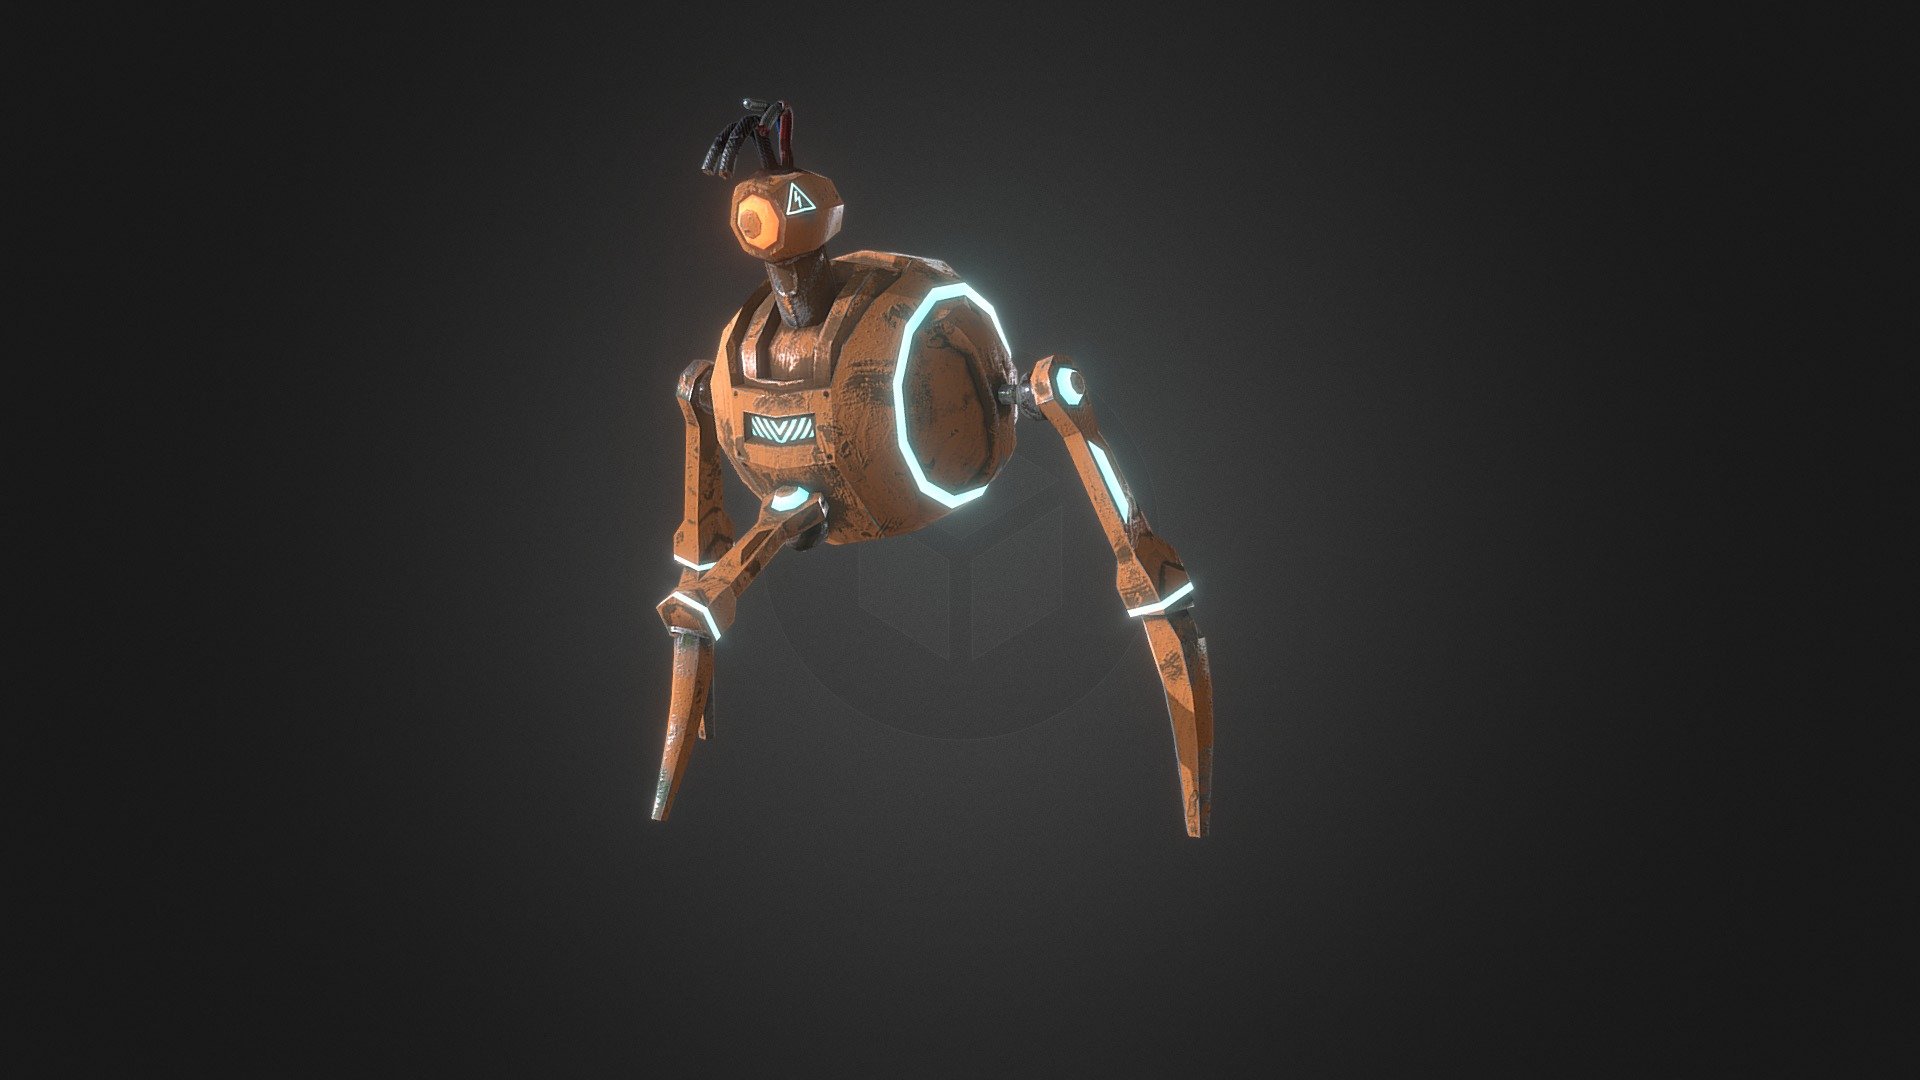 Game ready asset featuring low poly geometry and PBR textures 3d model